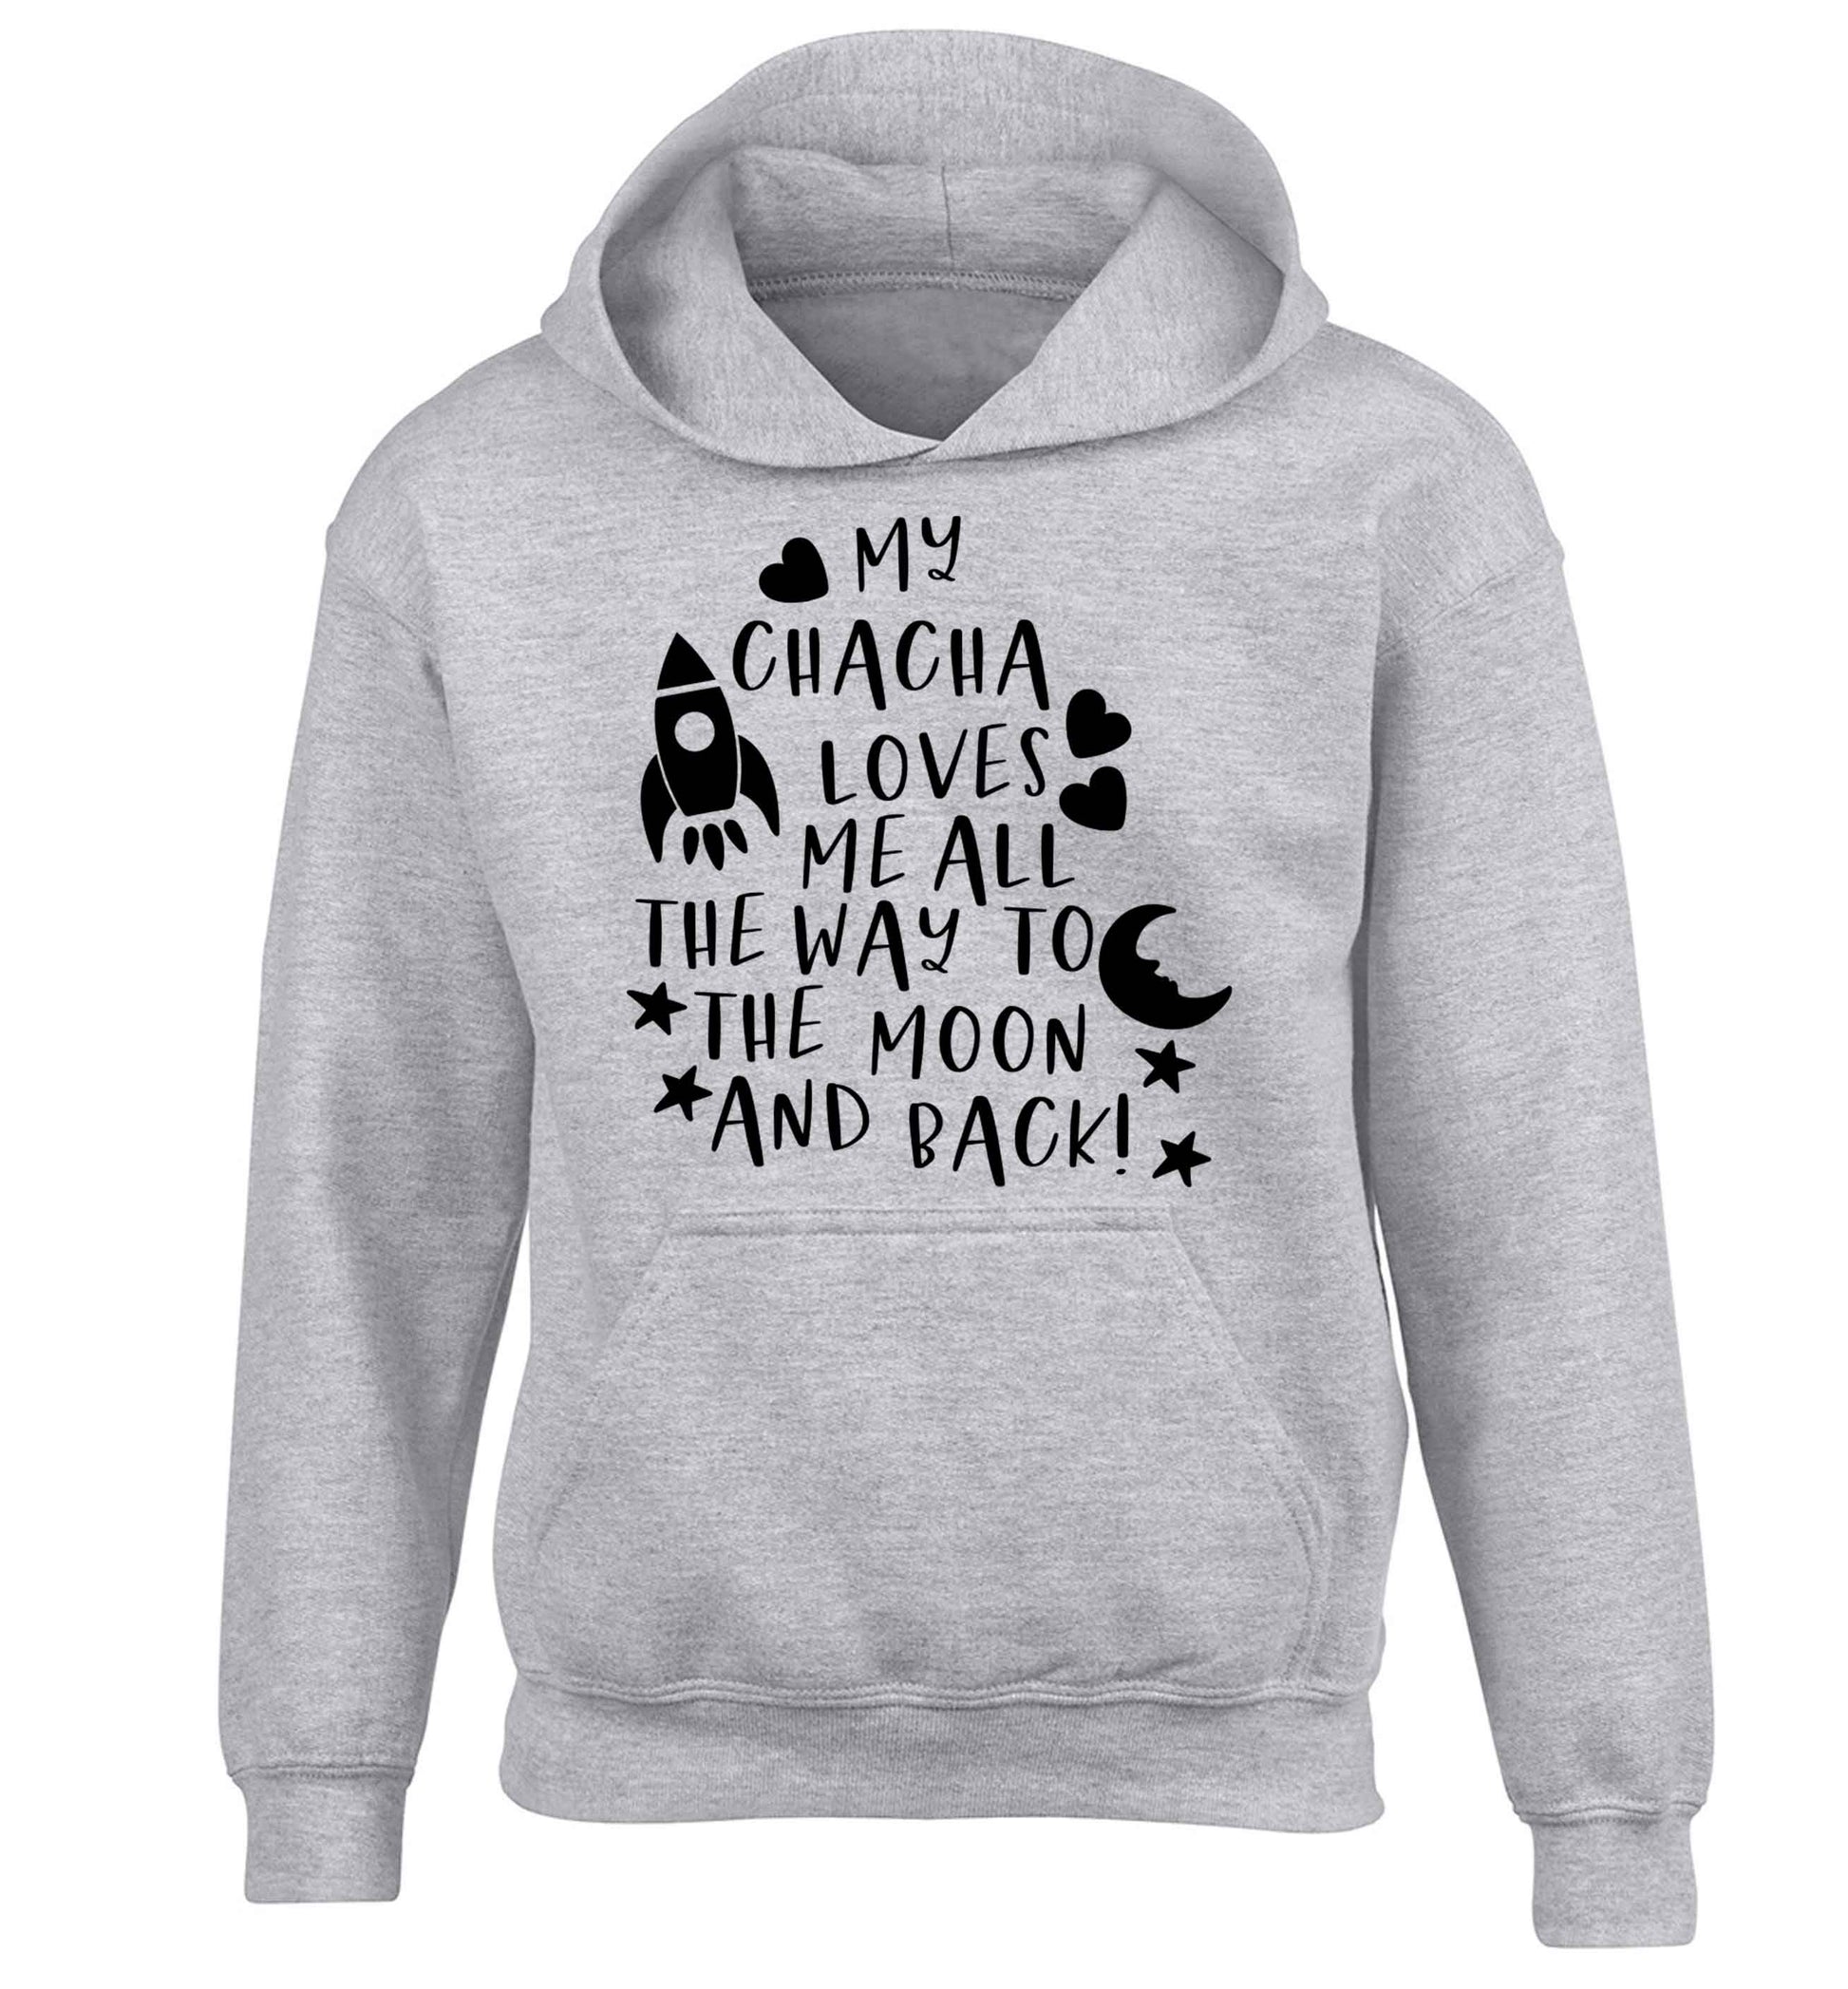 My chacha loves me all the way to the moon and back children's grey hoodie 12-13 Years